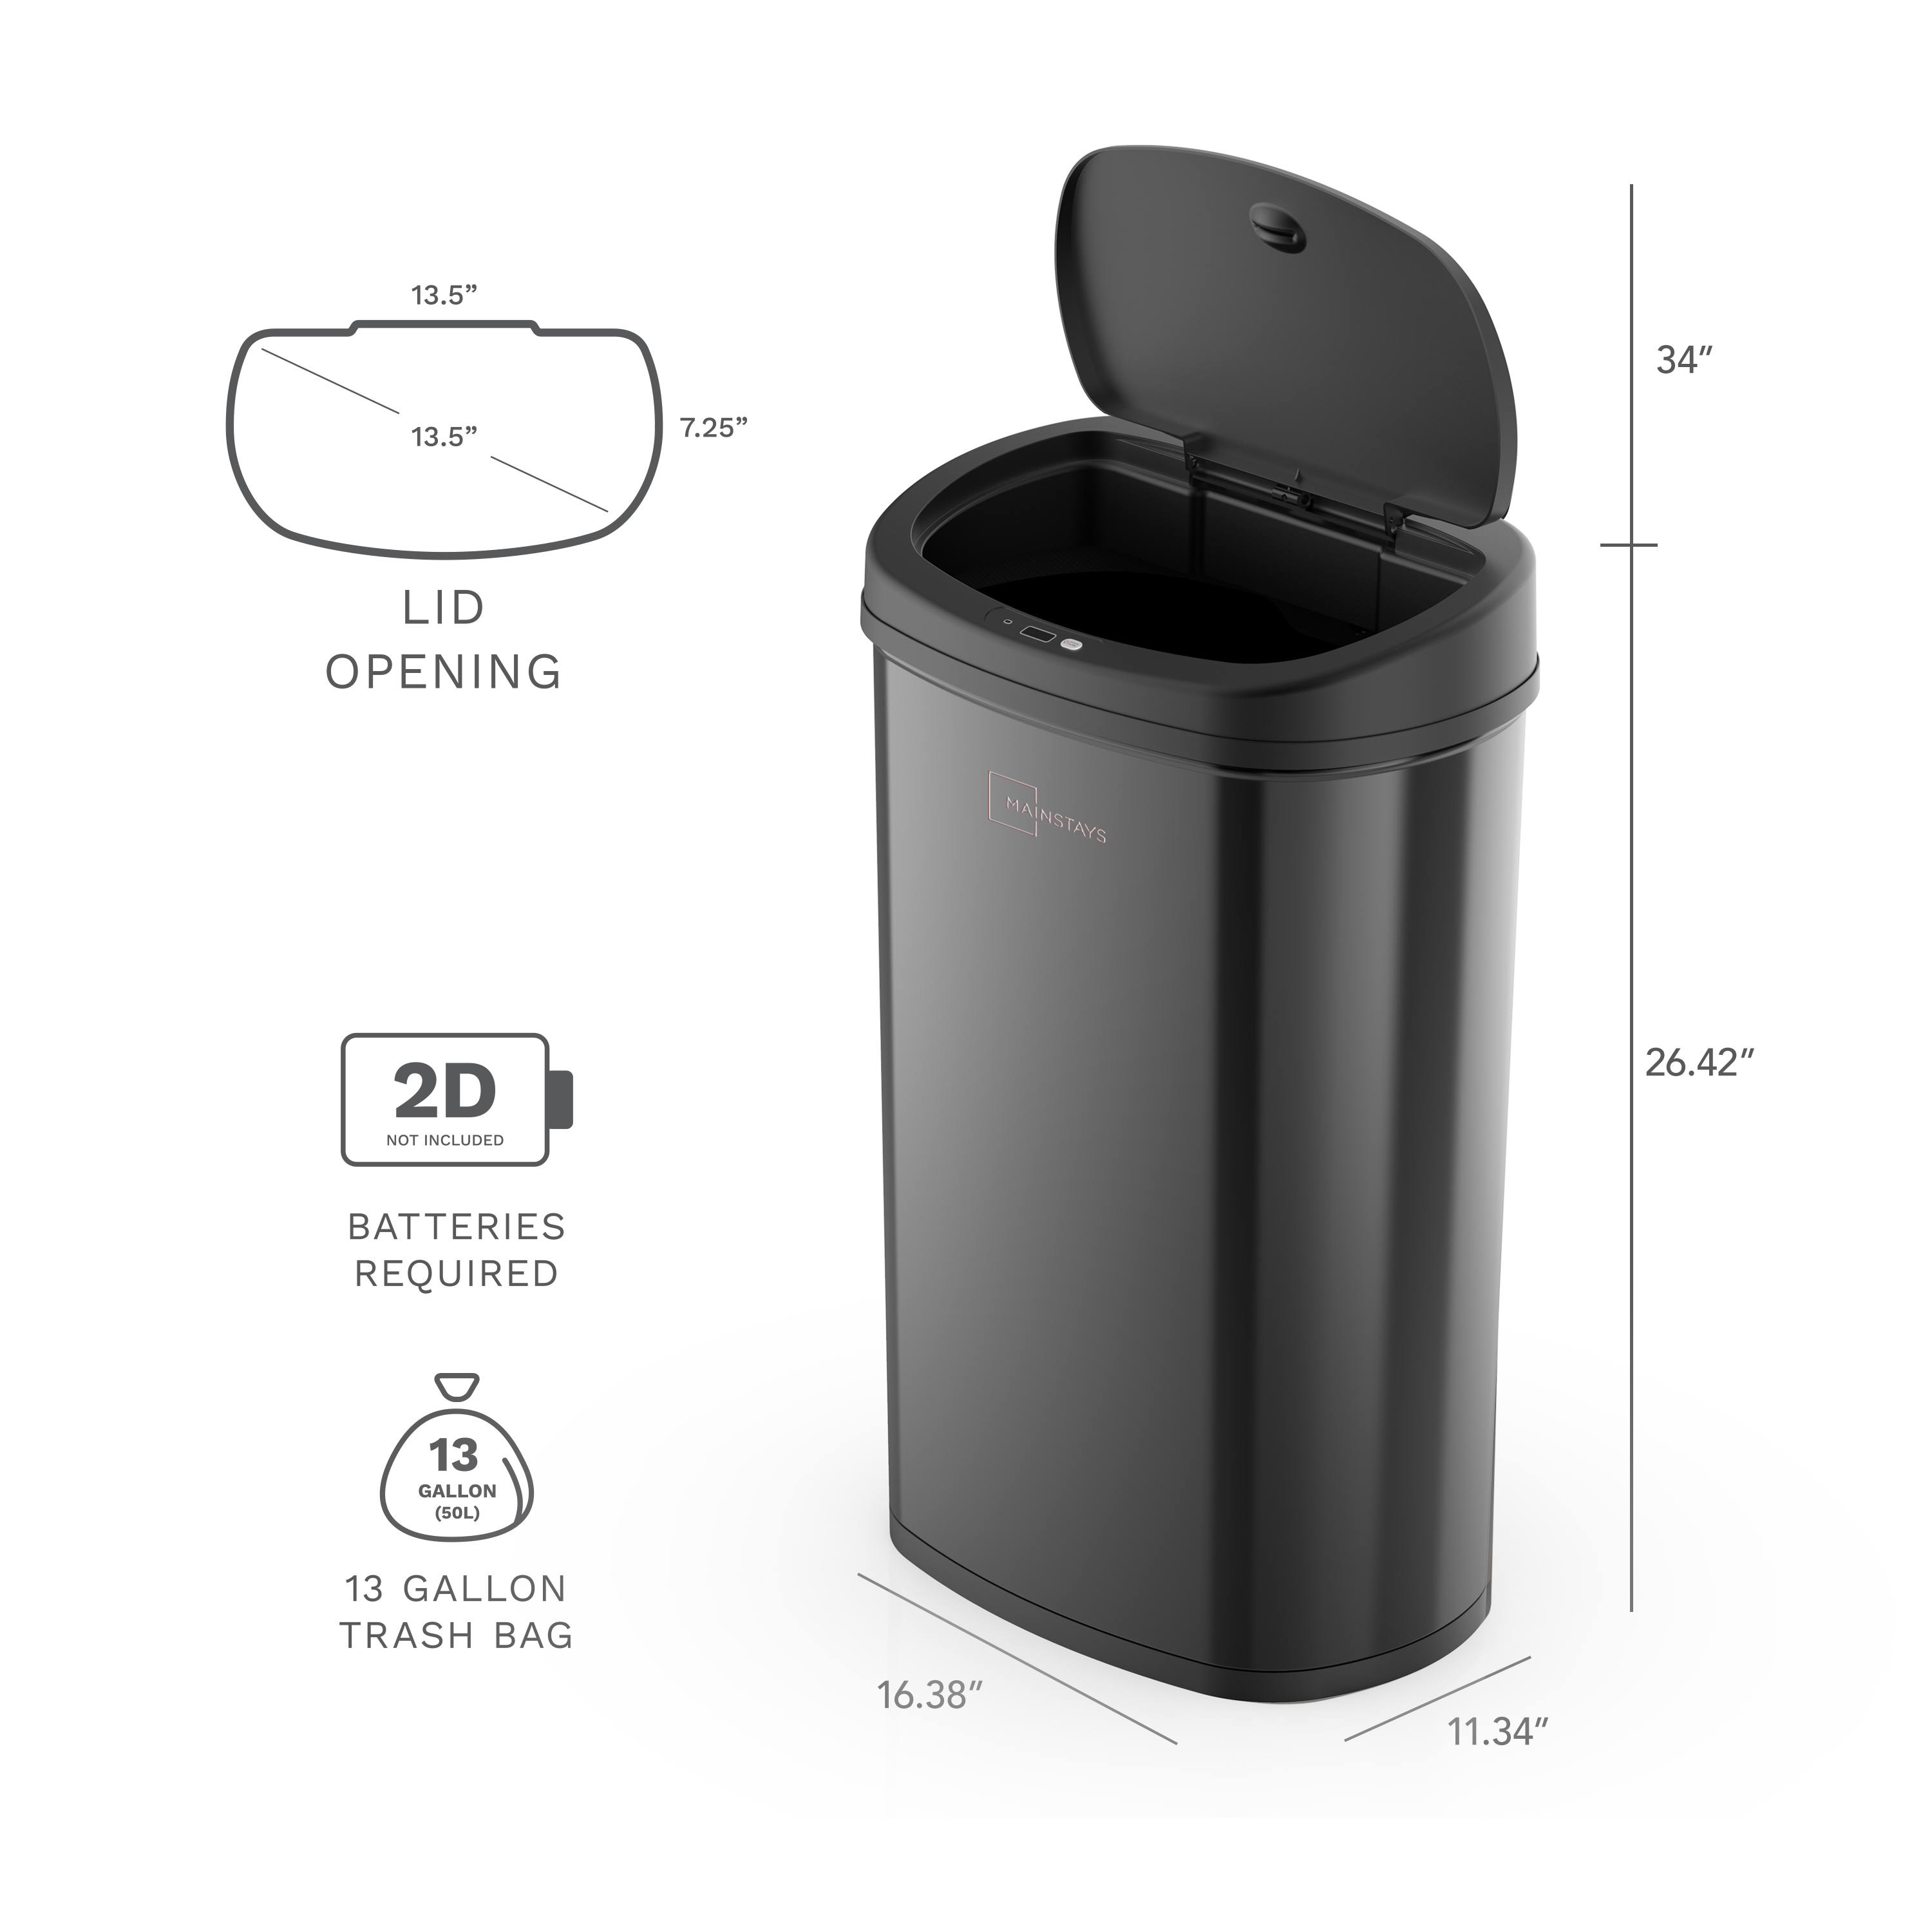 Mainstays 13.2 gal /50 L Motion Sensor Kitchen Garbage Can, Black Stainless Steel - image 3 of 12